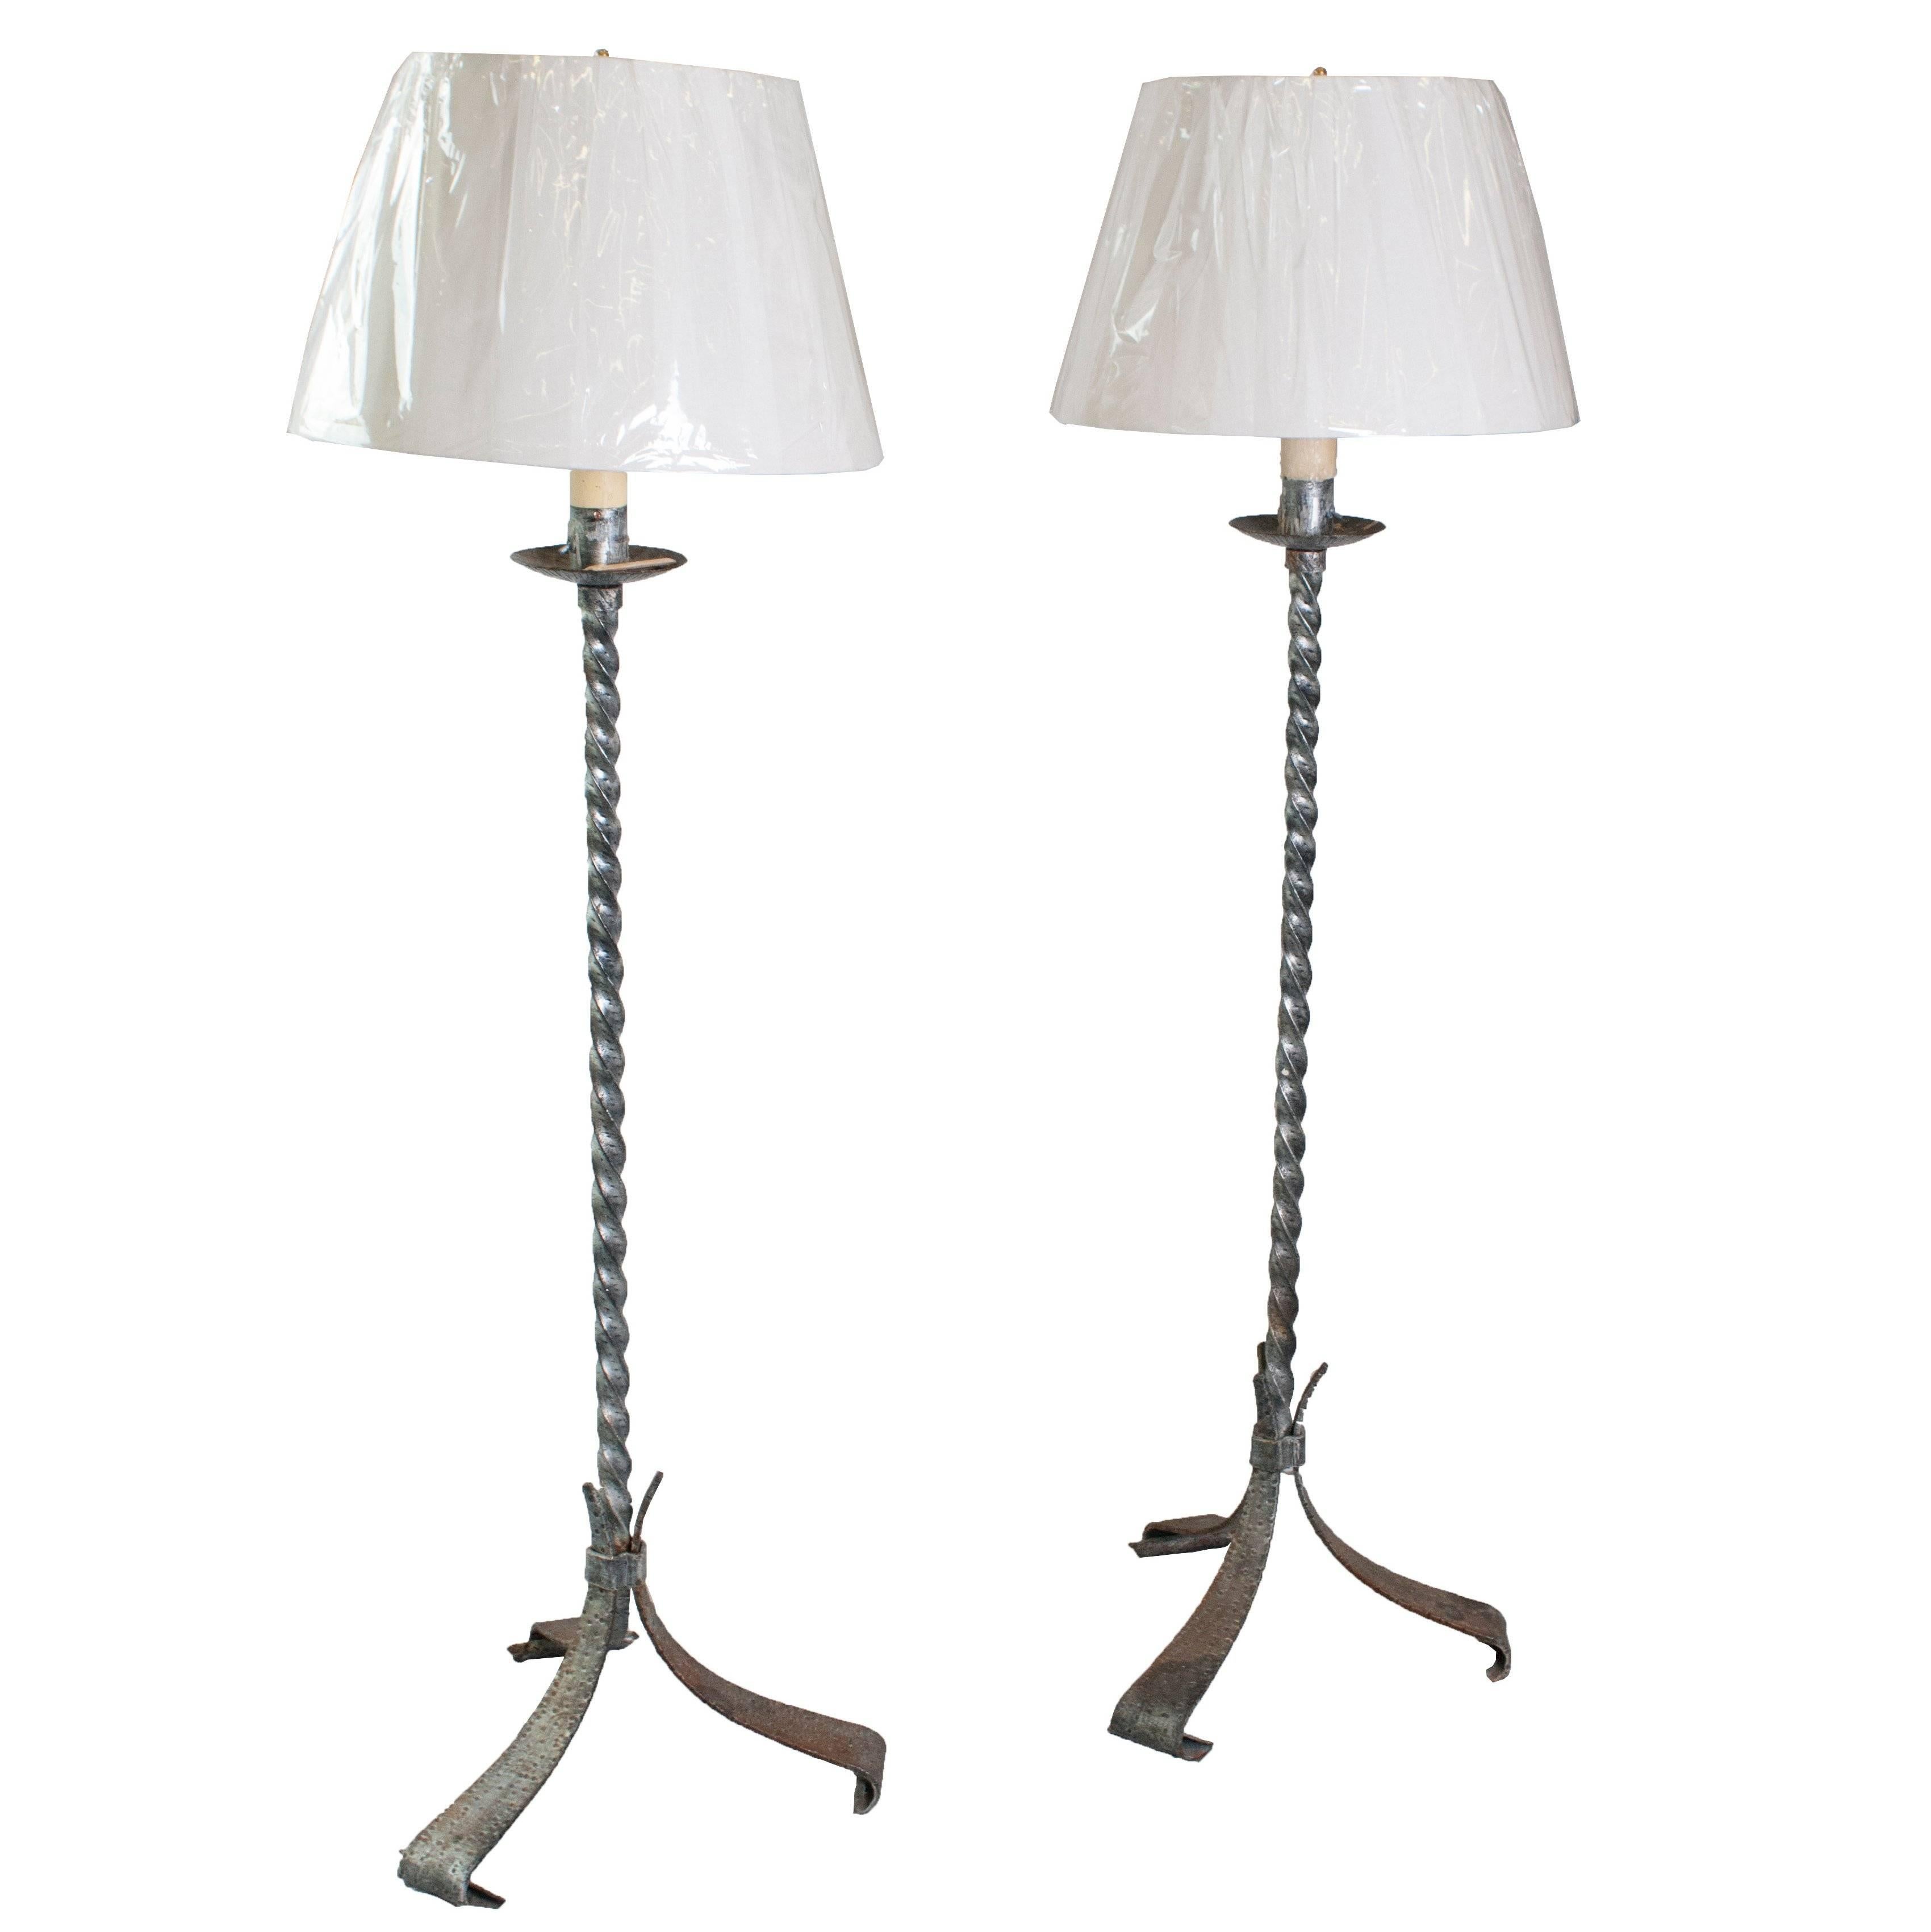 Pair of Forged Iron Twisted Column Floor Lamps